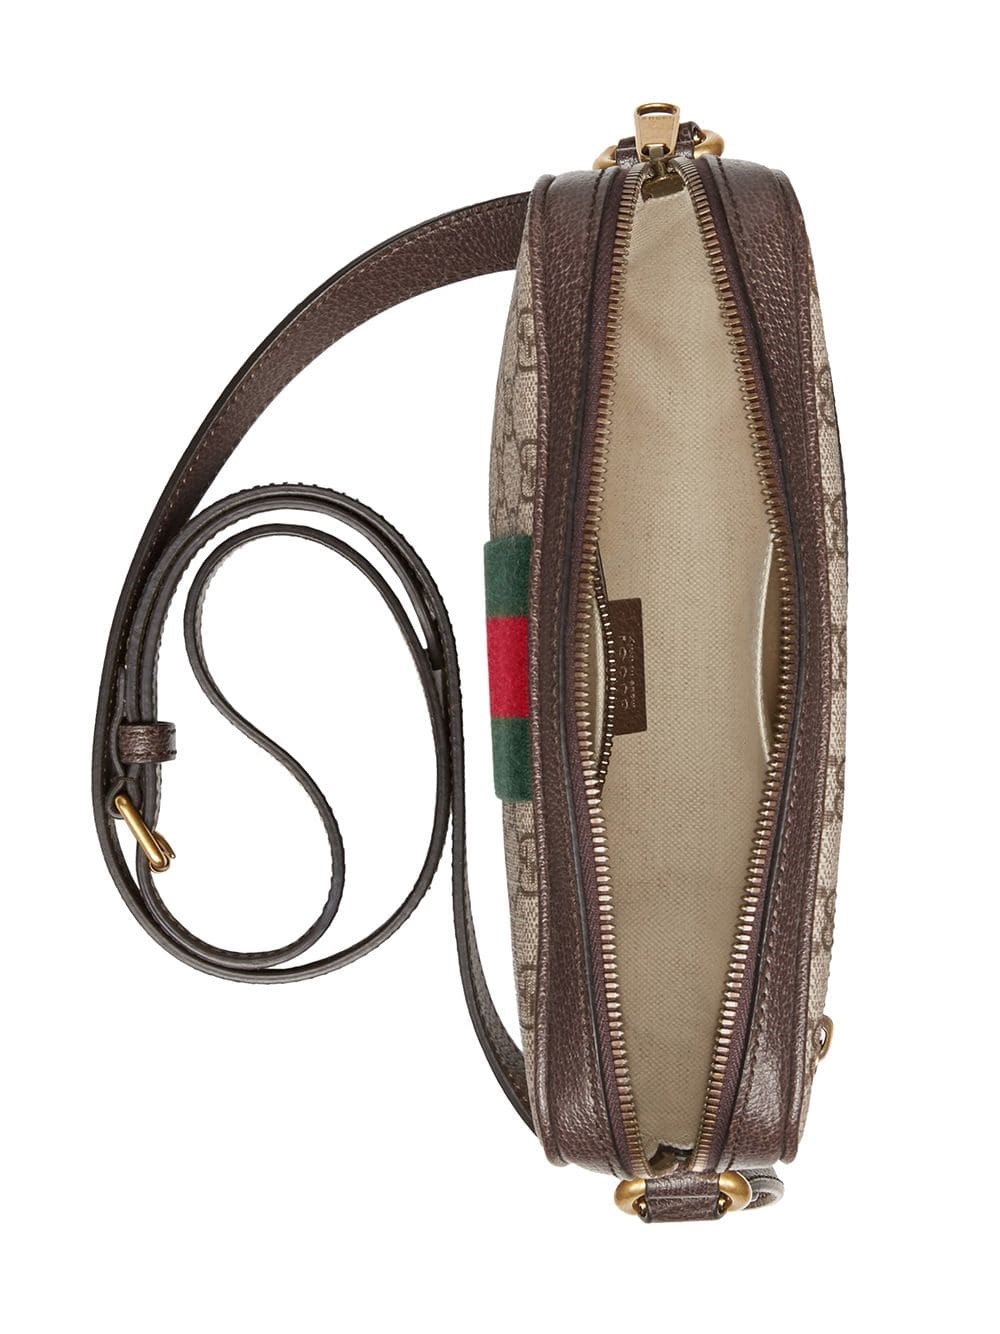 gucci GG PRINT CROSS BODY BAG available on 0 - 26179